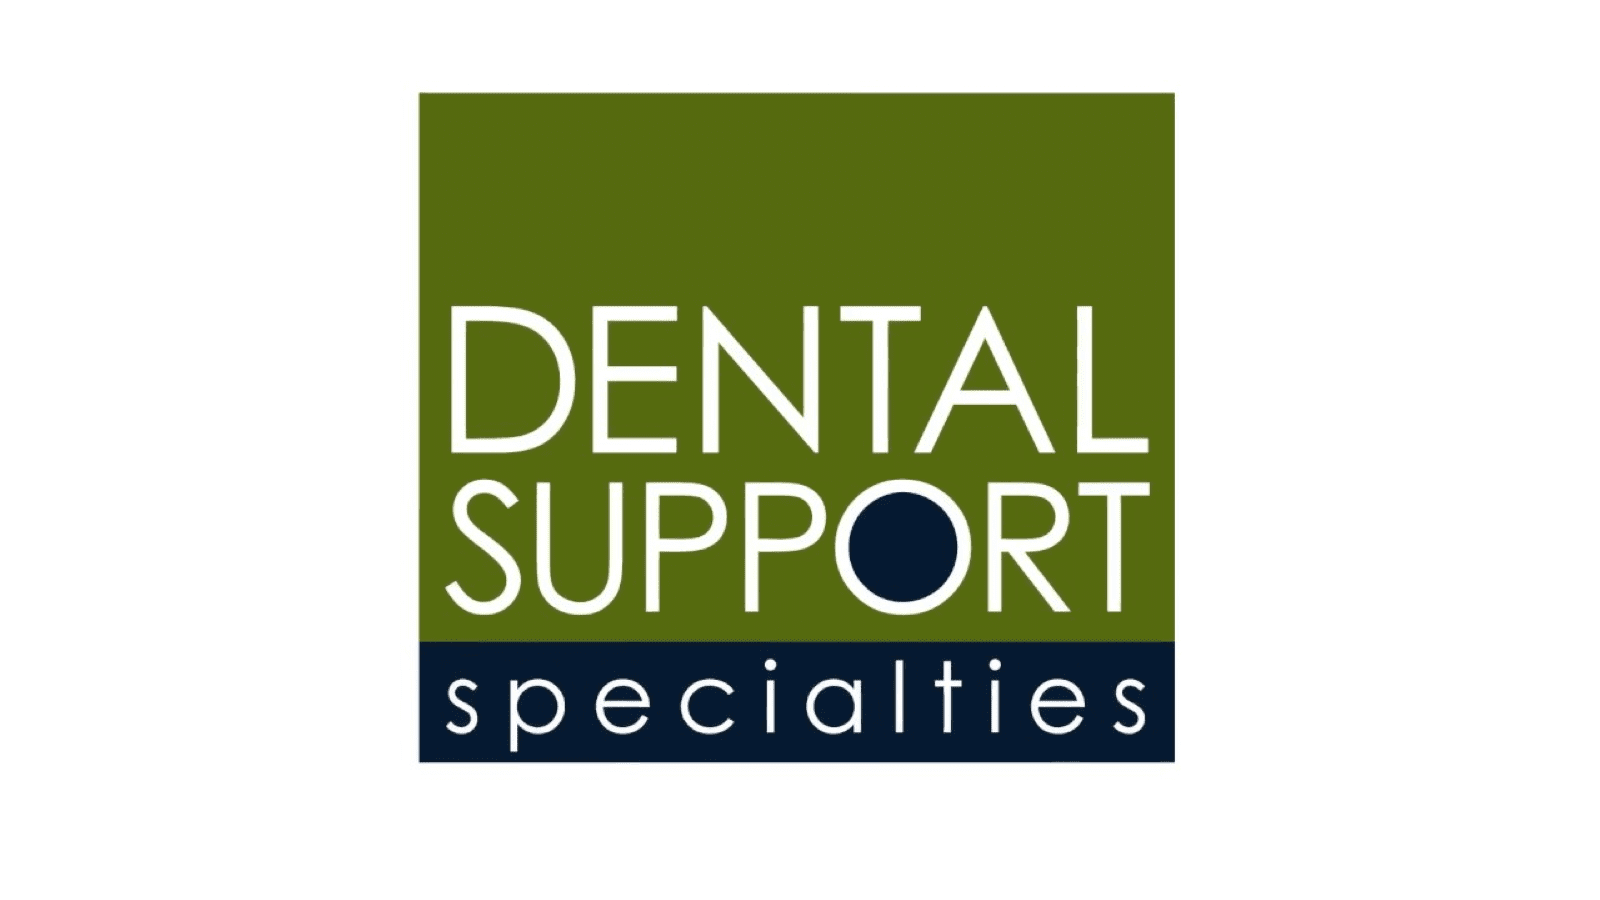 Dental support specialists 1